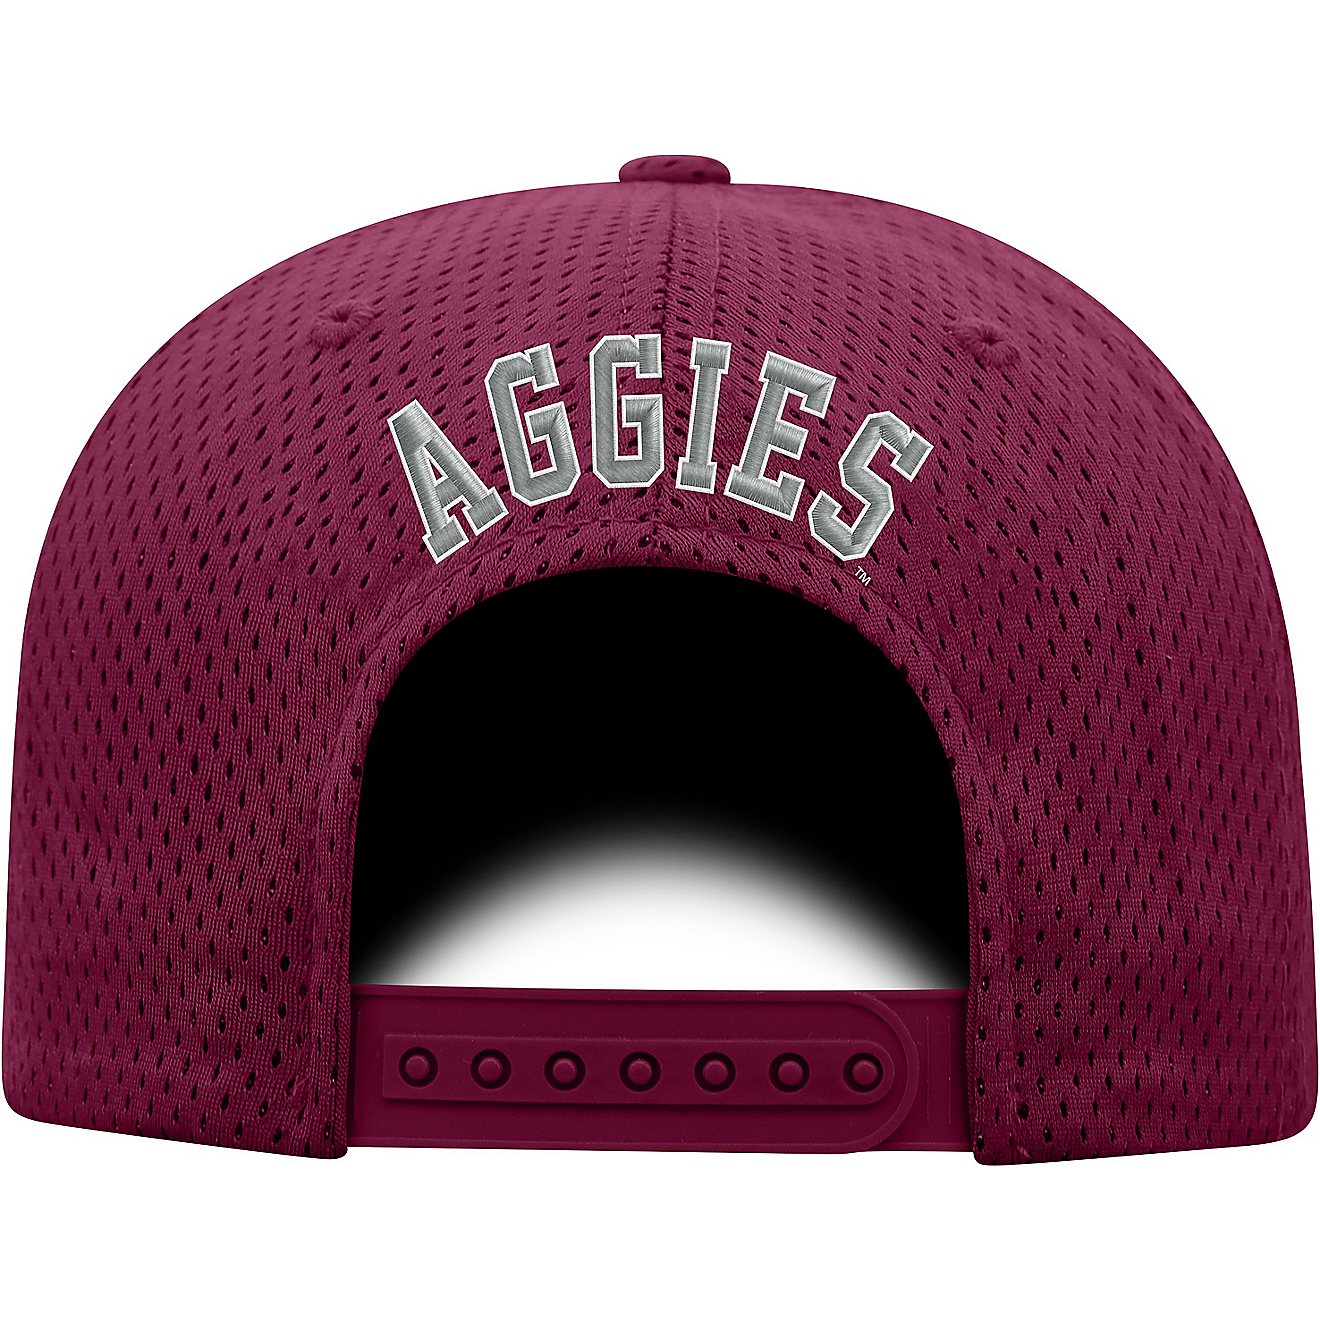 Top of the World Kids' Texas A&M University Spiker Adjustable Cap                                                                - view number 2